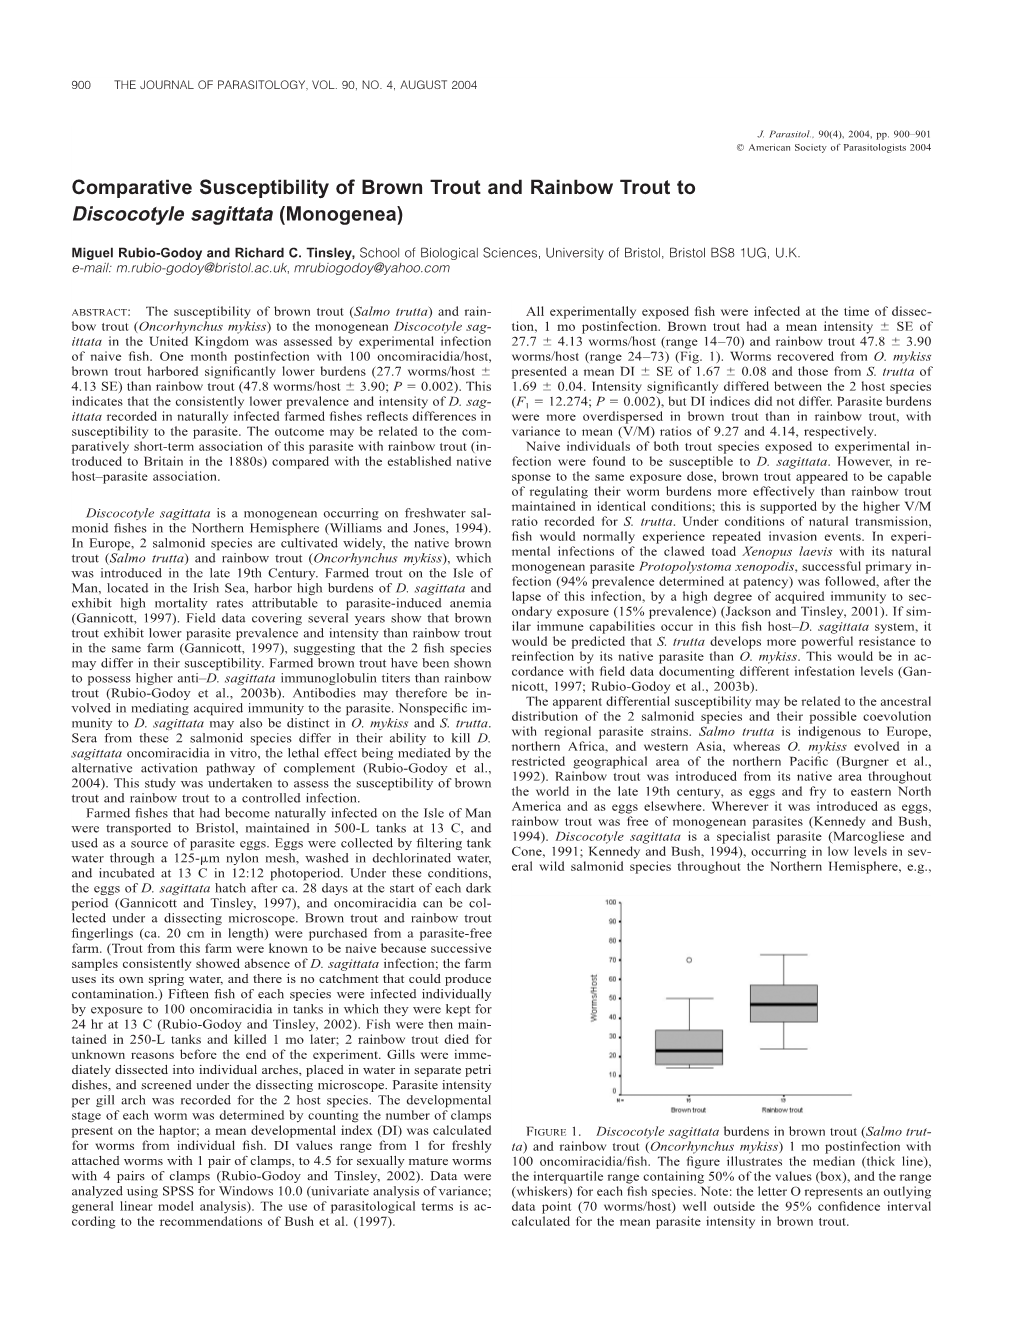 Comparative Susceptibility of Brown Trout and Rainbow Trout to Discocotyle Sagittata (Monogenea)